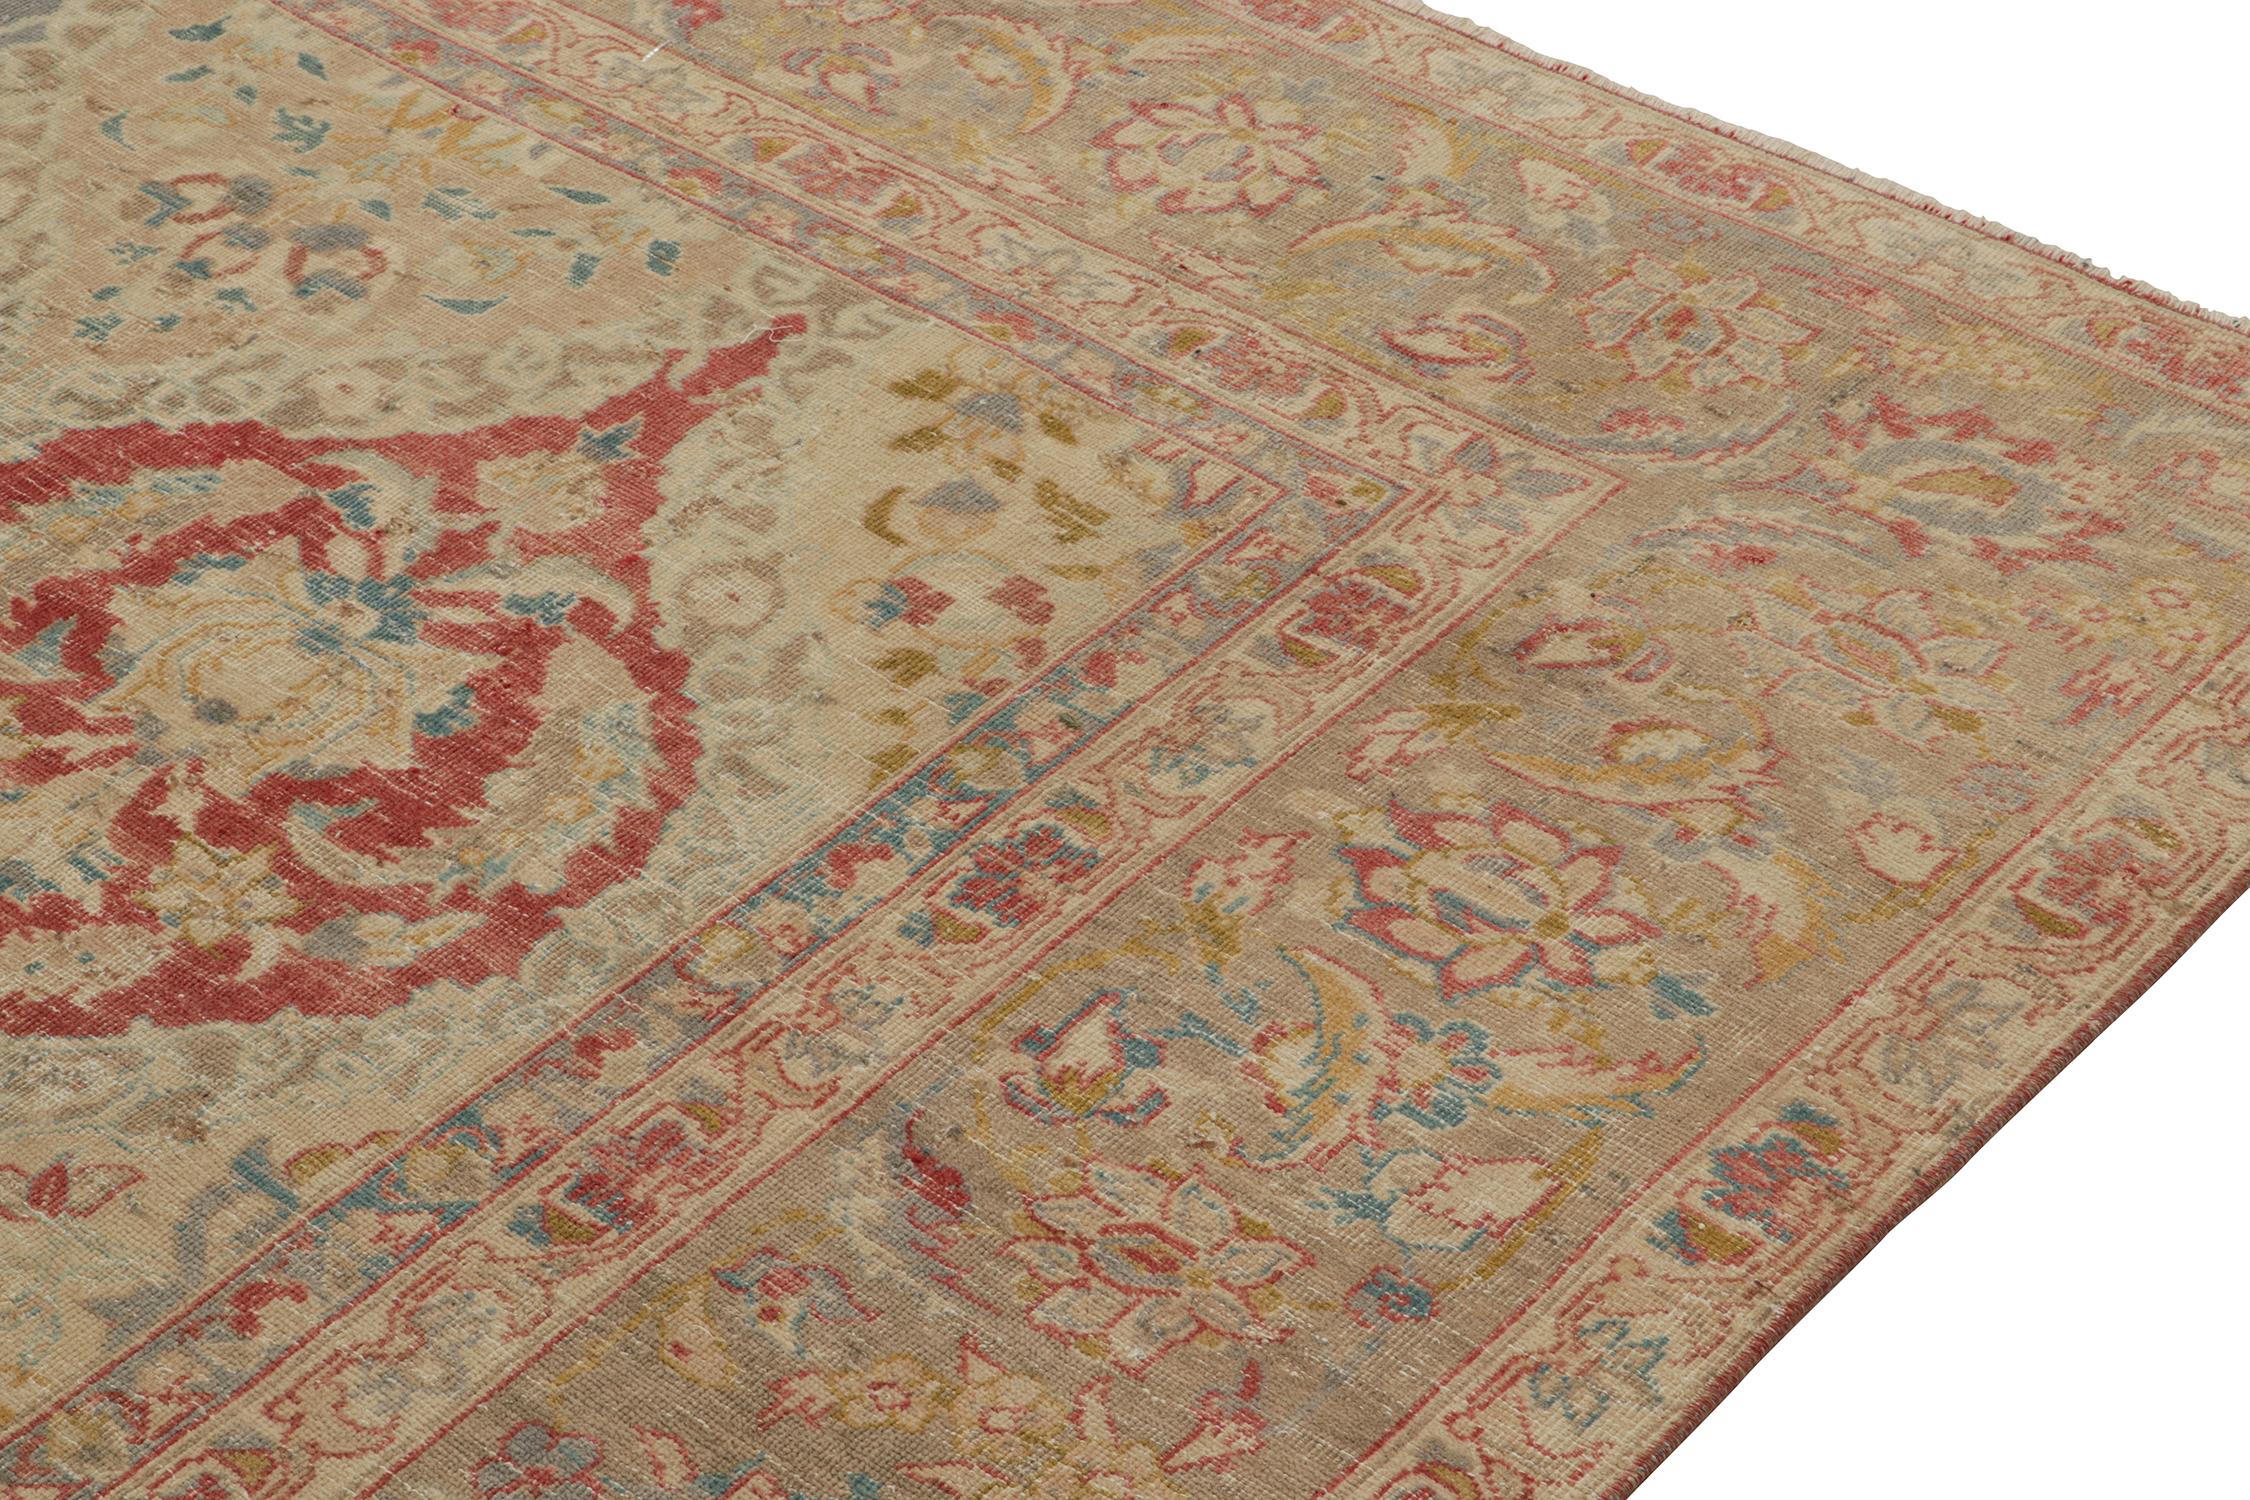 Early 20th Century Antique Persian Tabriz Rug in Beige with Red and Floral Pattern by Rug & Kilim For Sale